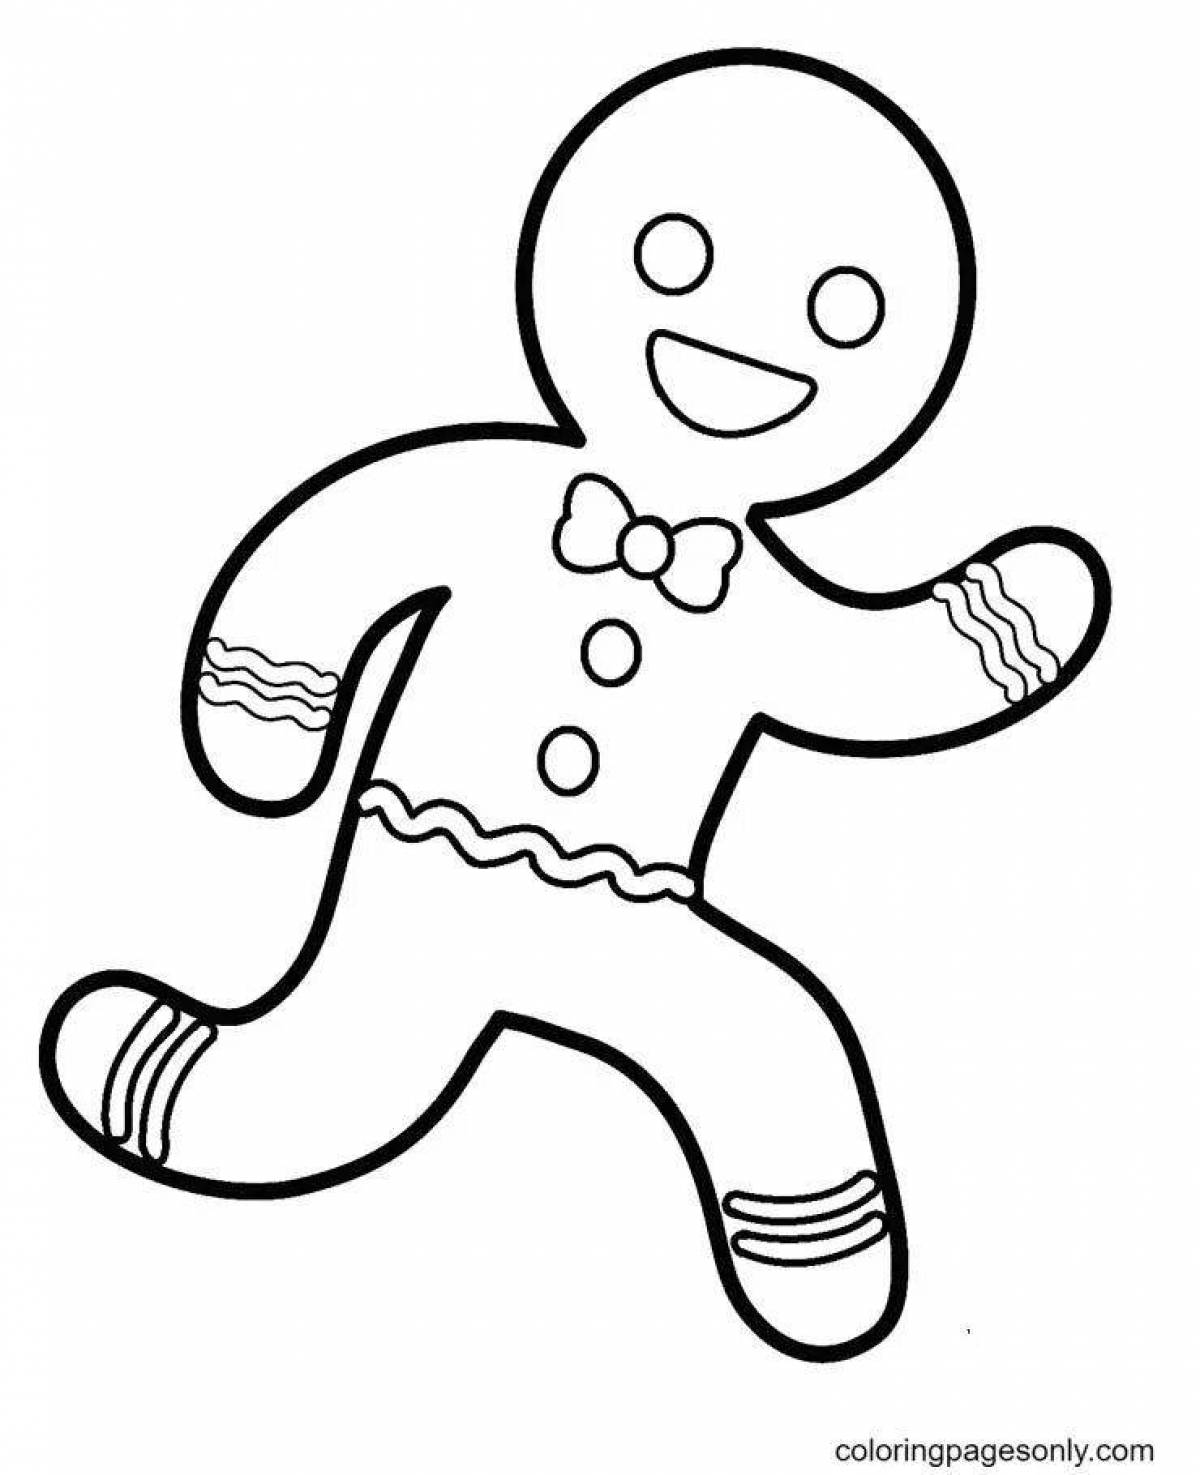 Coloring page of a cheerful gingerbread man